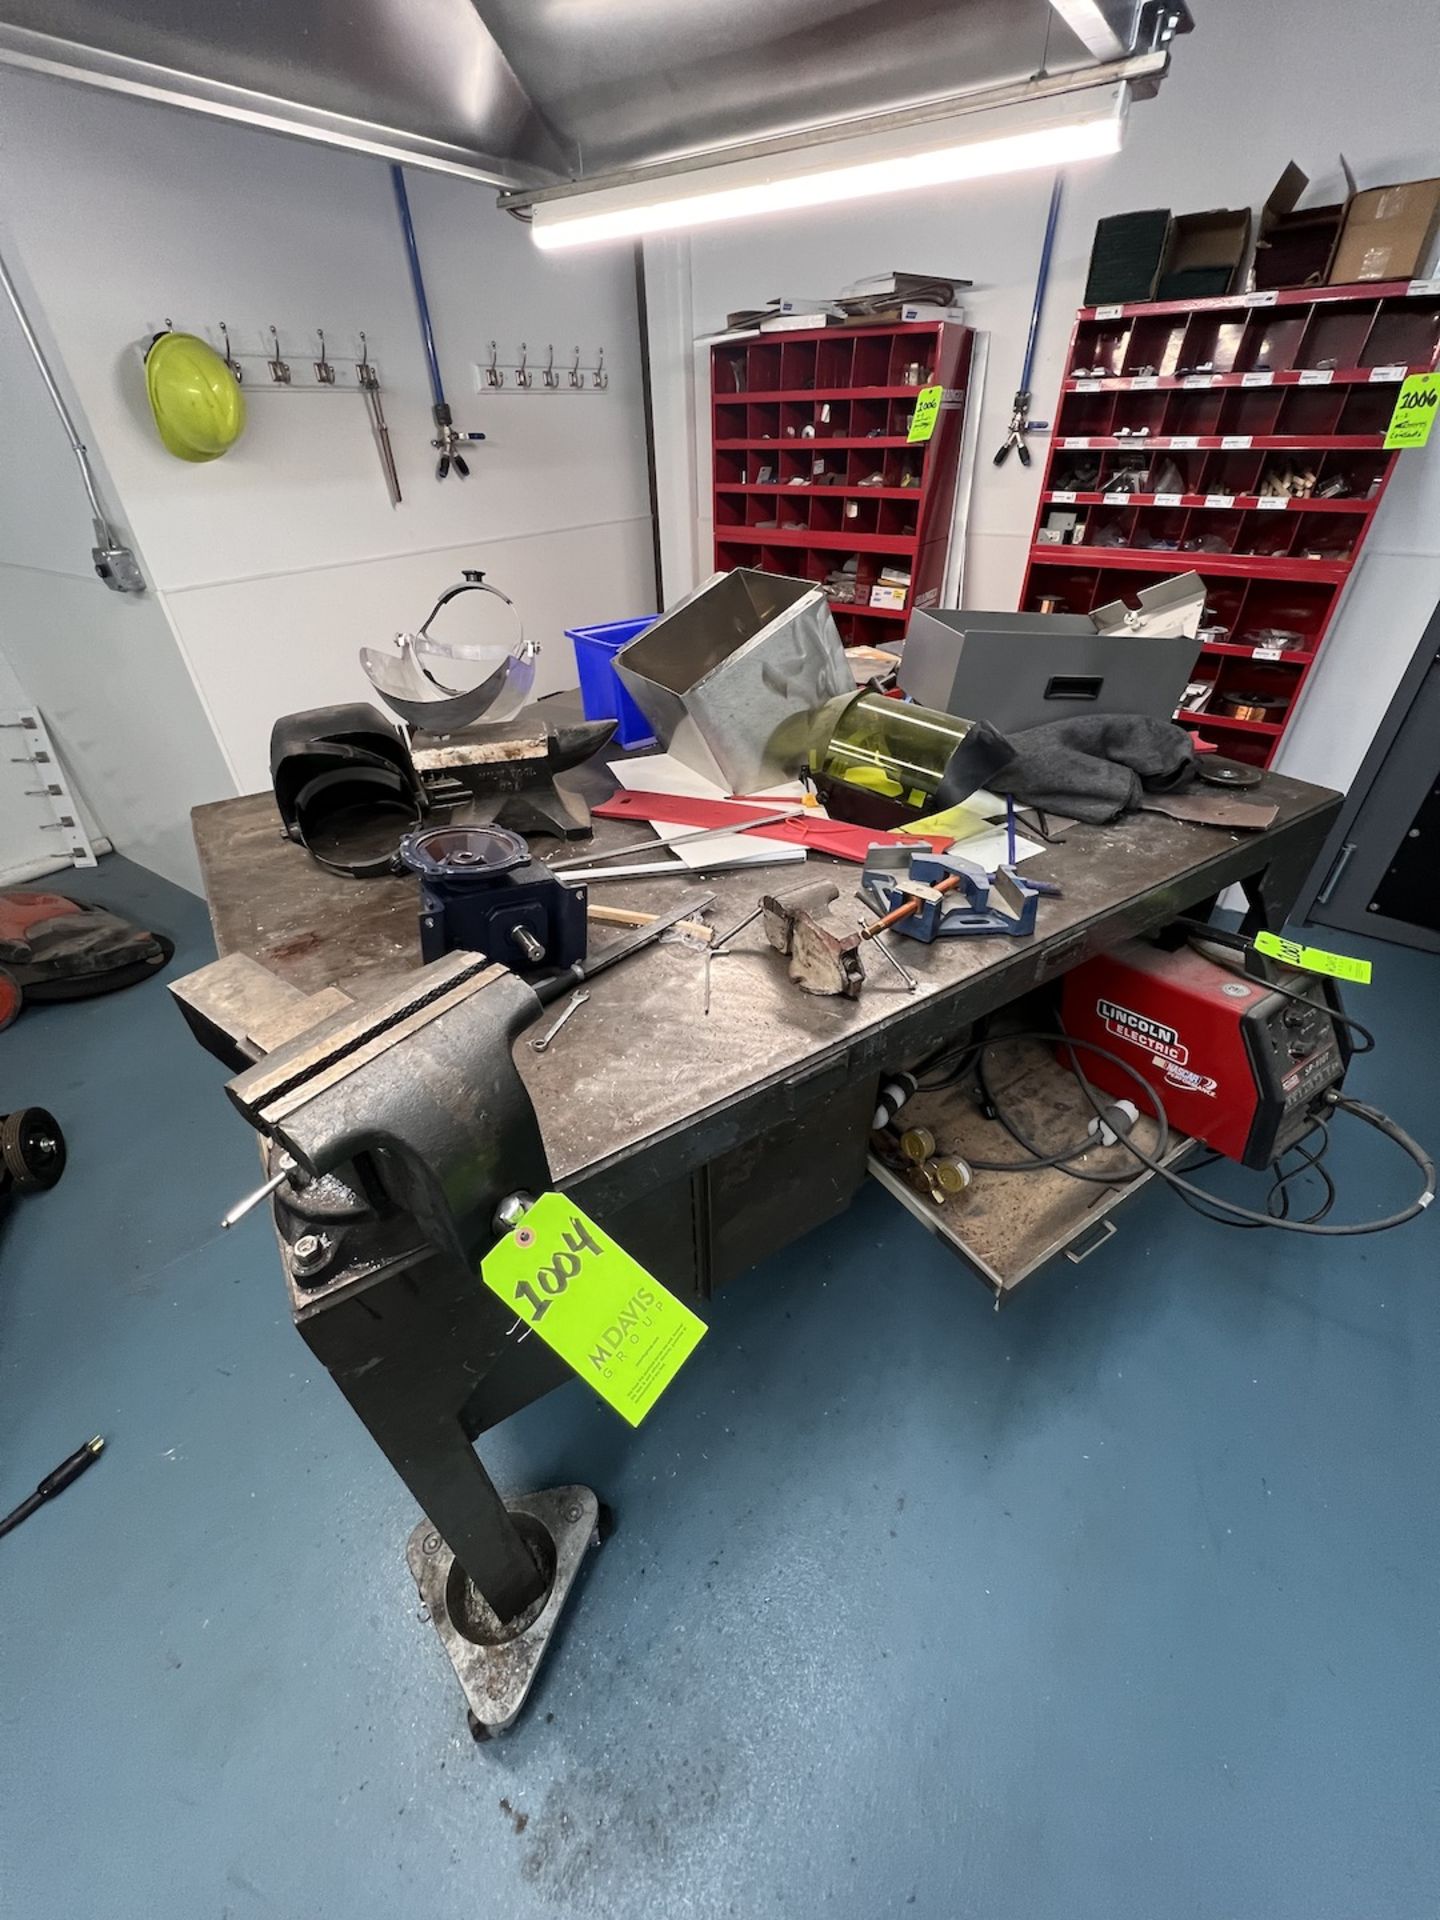 METAL WELDING TABLE WITH MULTIPLE VISES, INCLUDES CONTENTS OF CABINETS, C-CLAMPS AND ASSORTED TOOLS, - Image 2 of 11